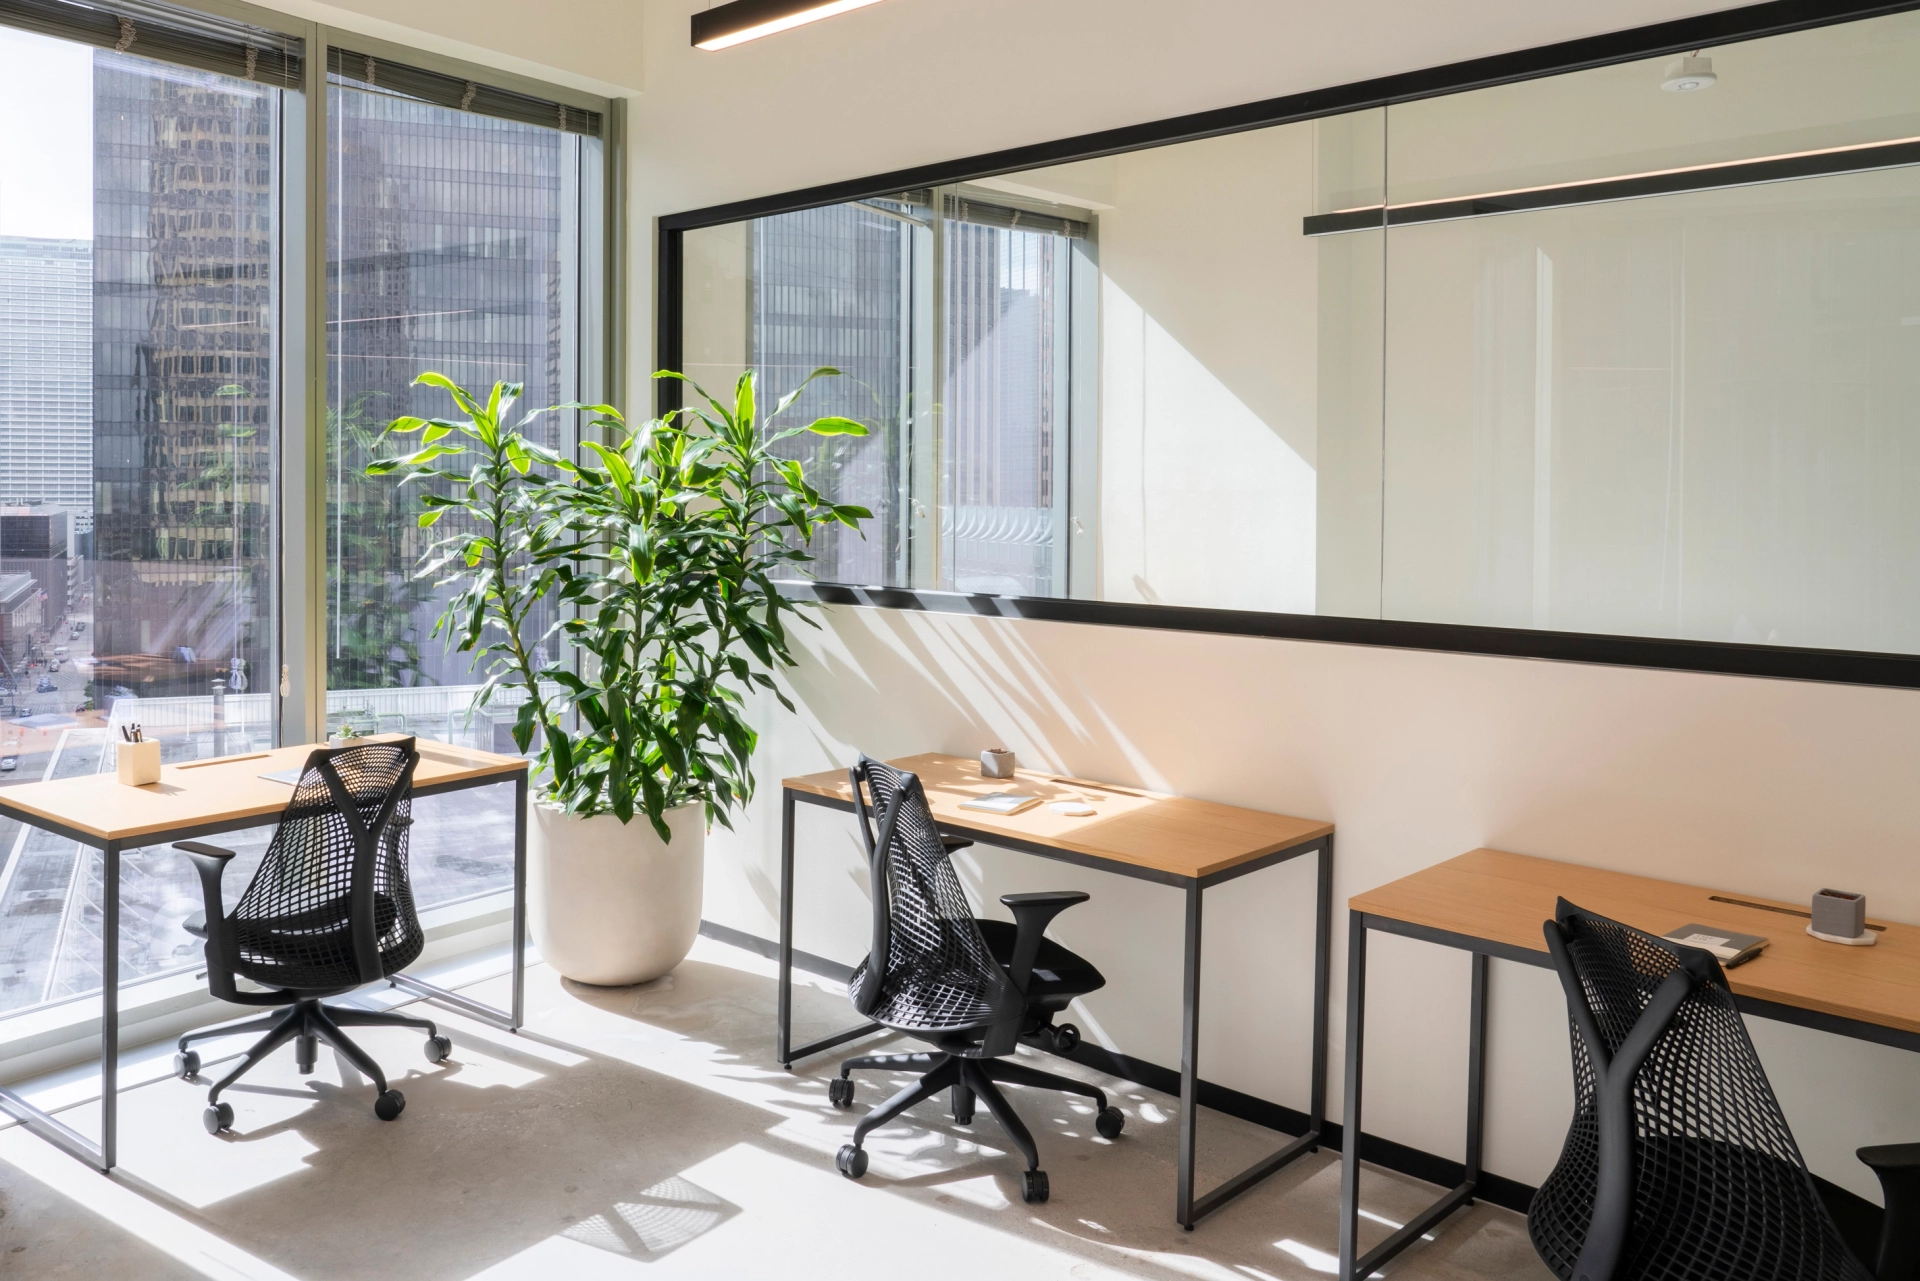 A workspace in New York, equipped with two desks, chairs, and a plant.